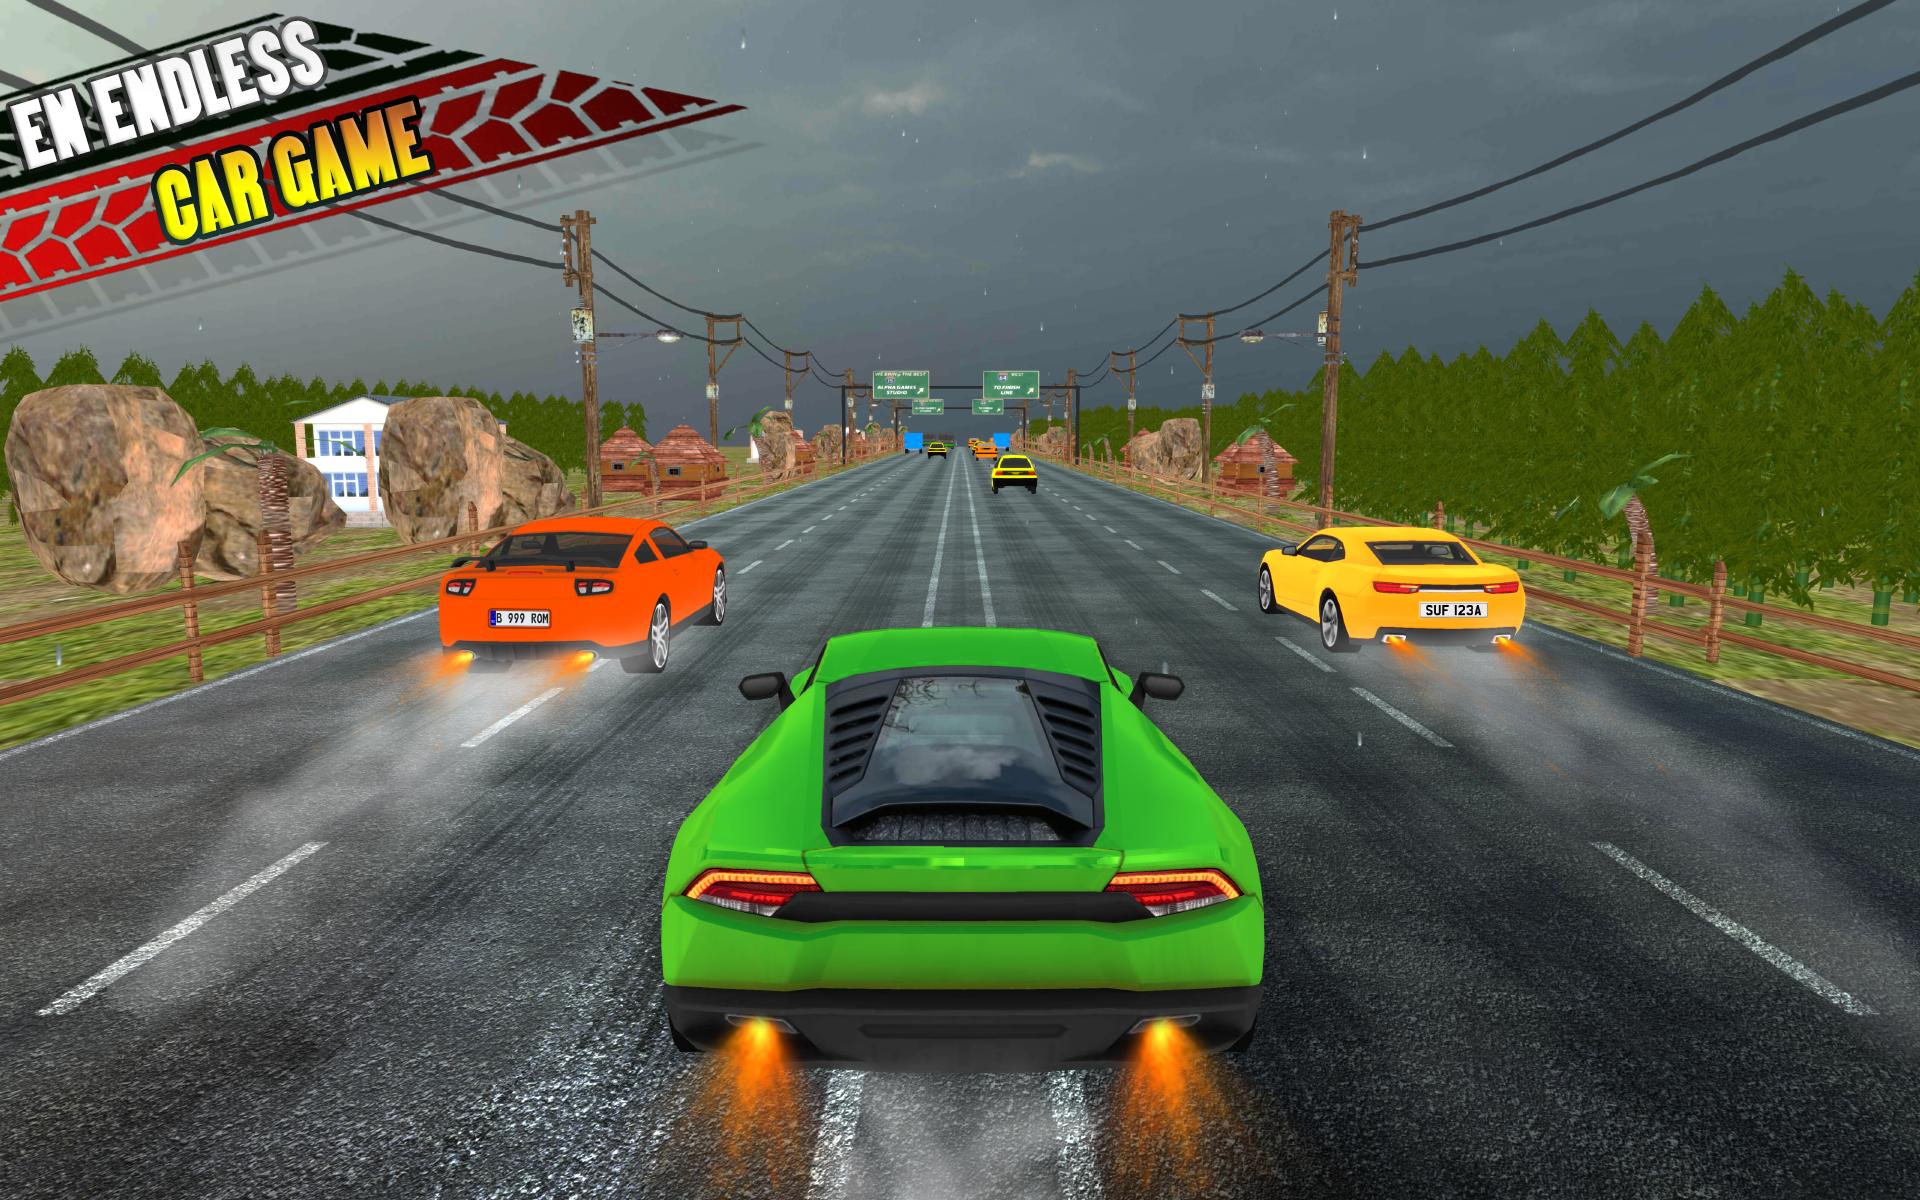 traffic highway racer: carreras de coches 2018 for Android - APK Download